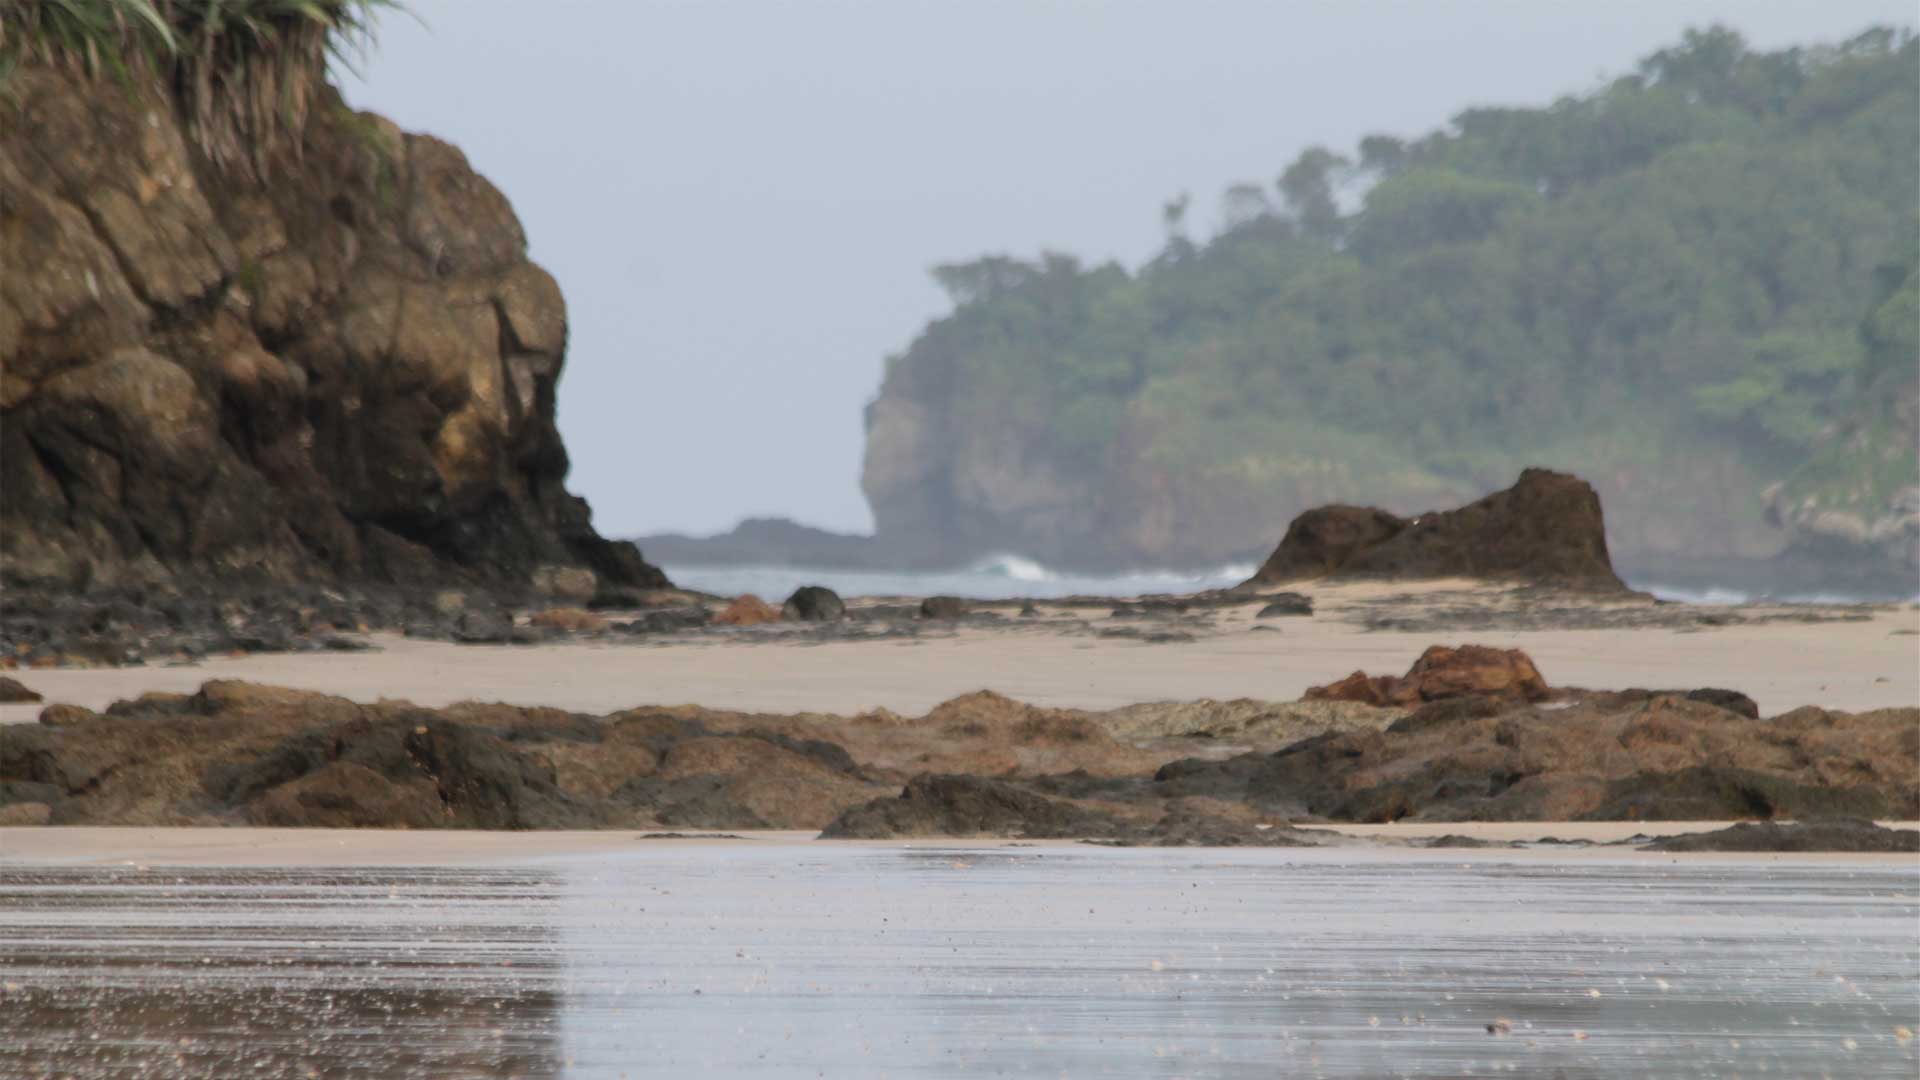 Beach rocks and boulders reflect off wet sand at low tide in Playa Grande, Costa Rica